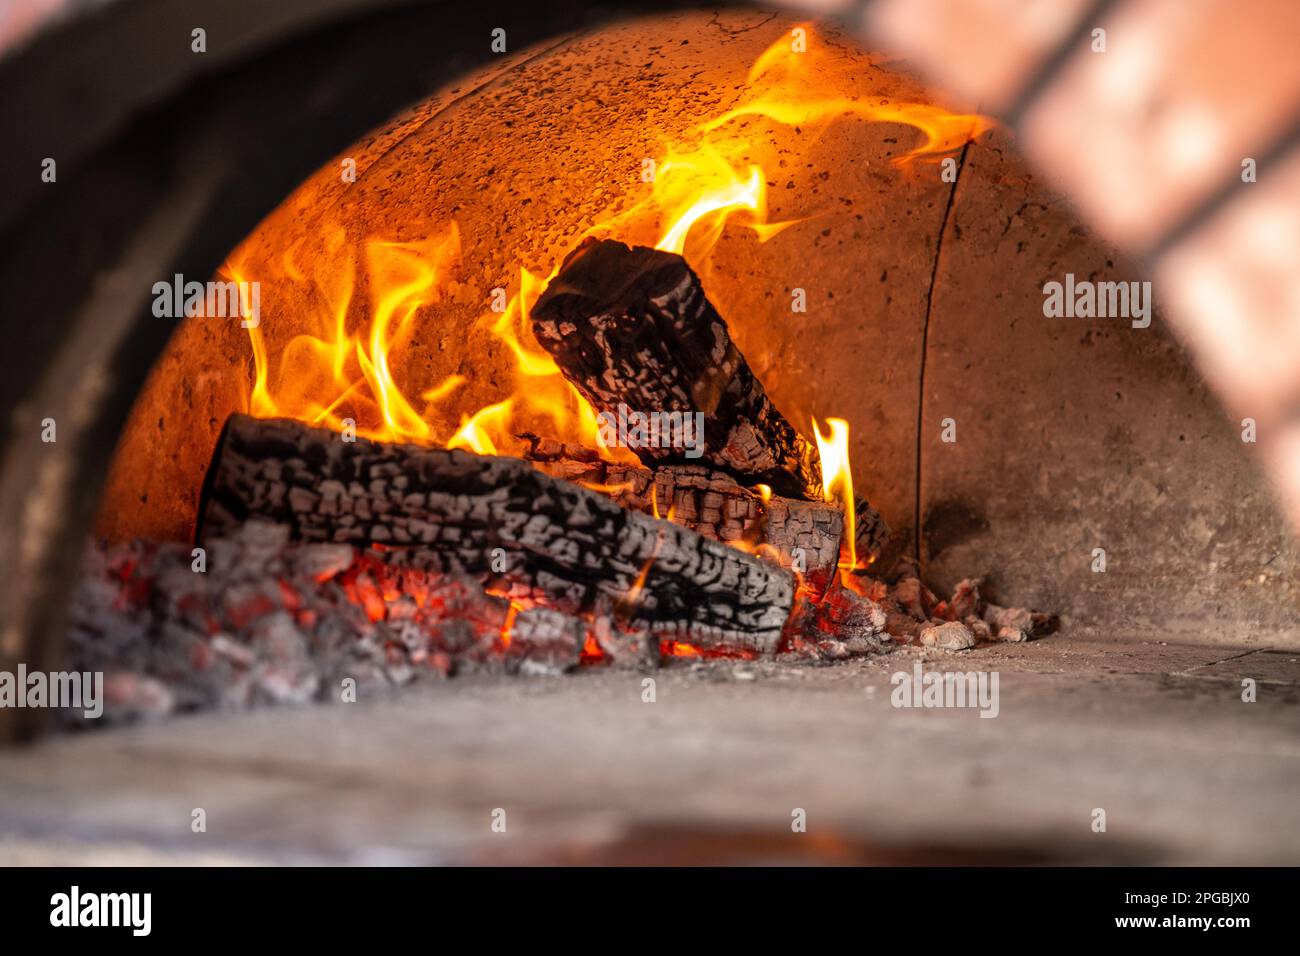 Brick Oven Pizza Cooker ready to place pizza in Stock Photo